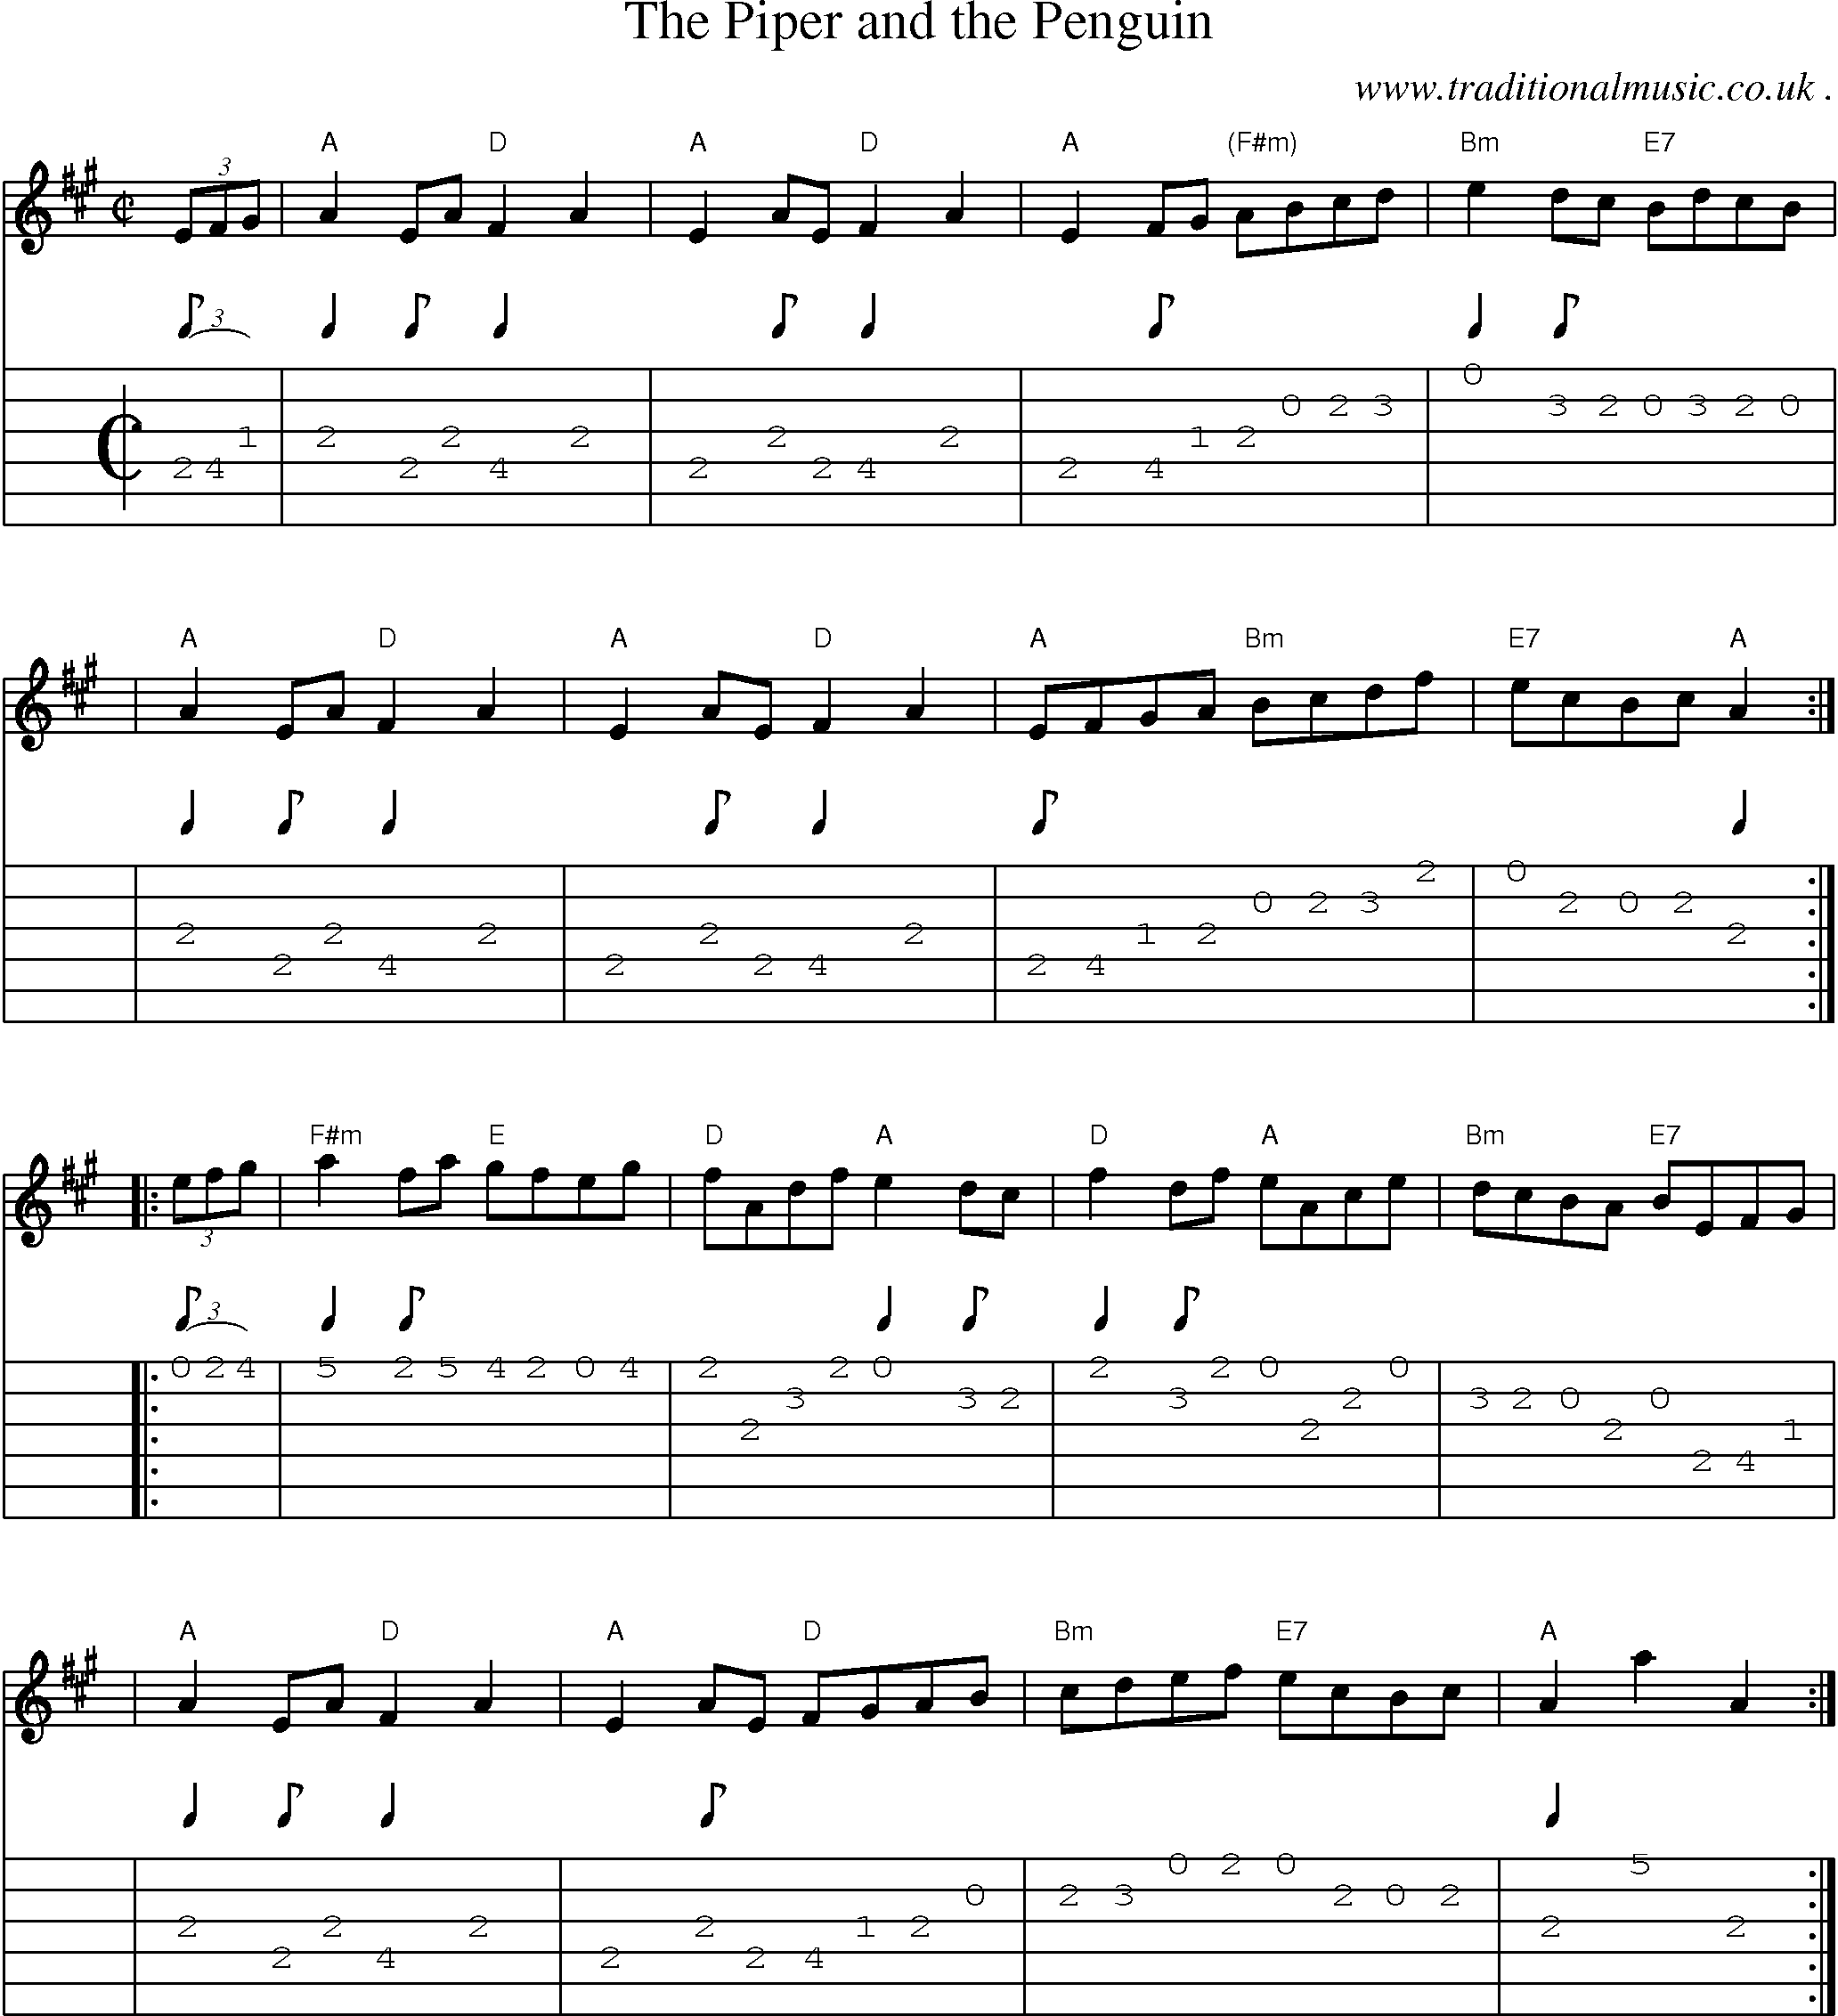 Sheet-music  score, Chords and Guitar Tabs for The Piper And The Penguin